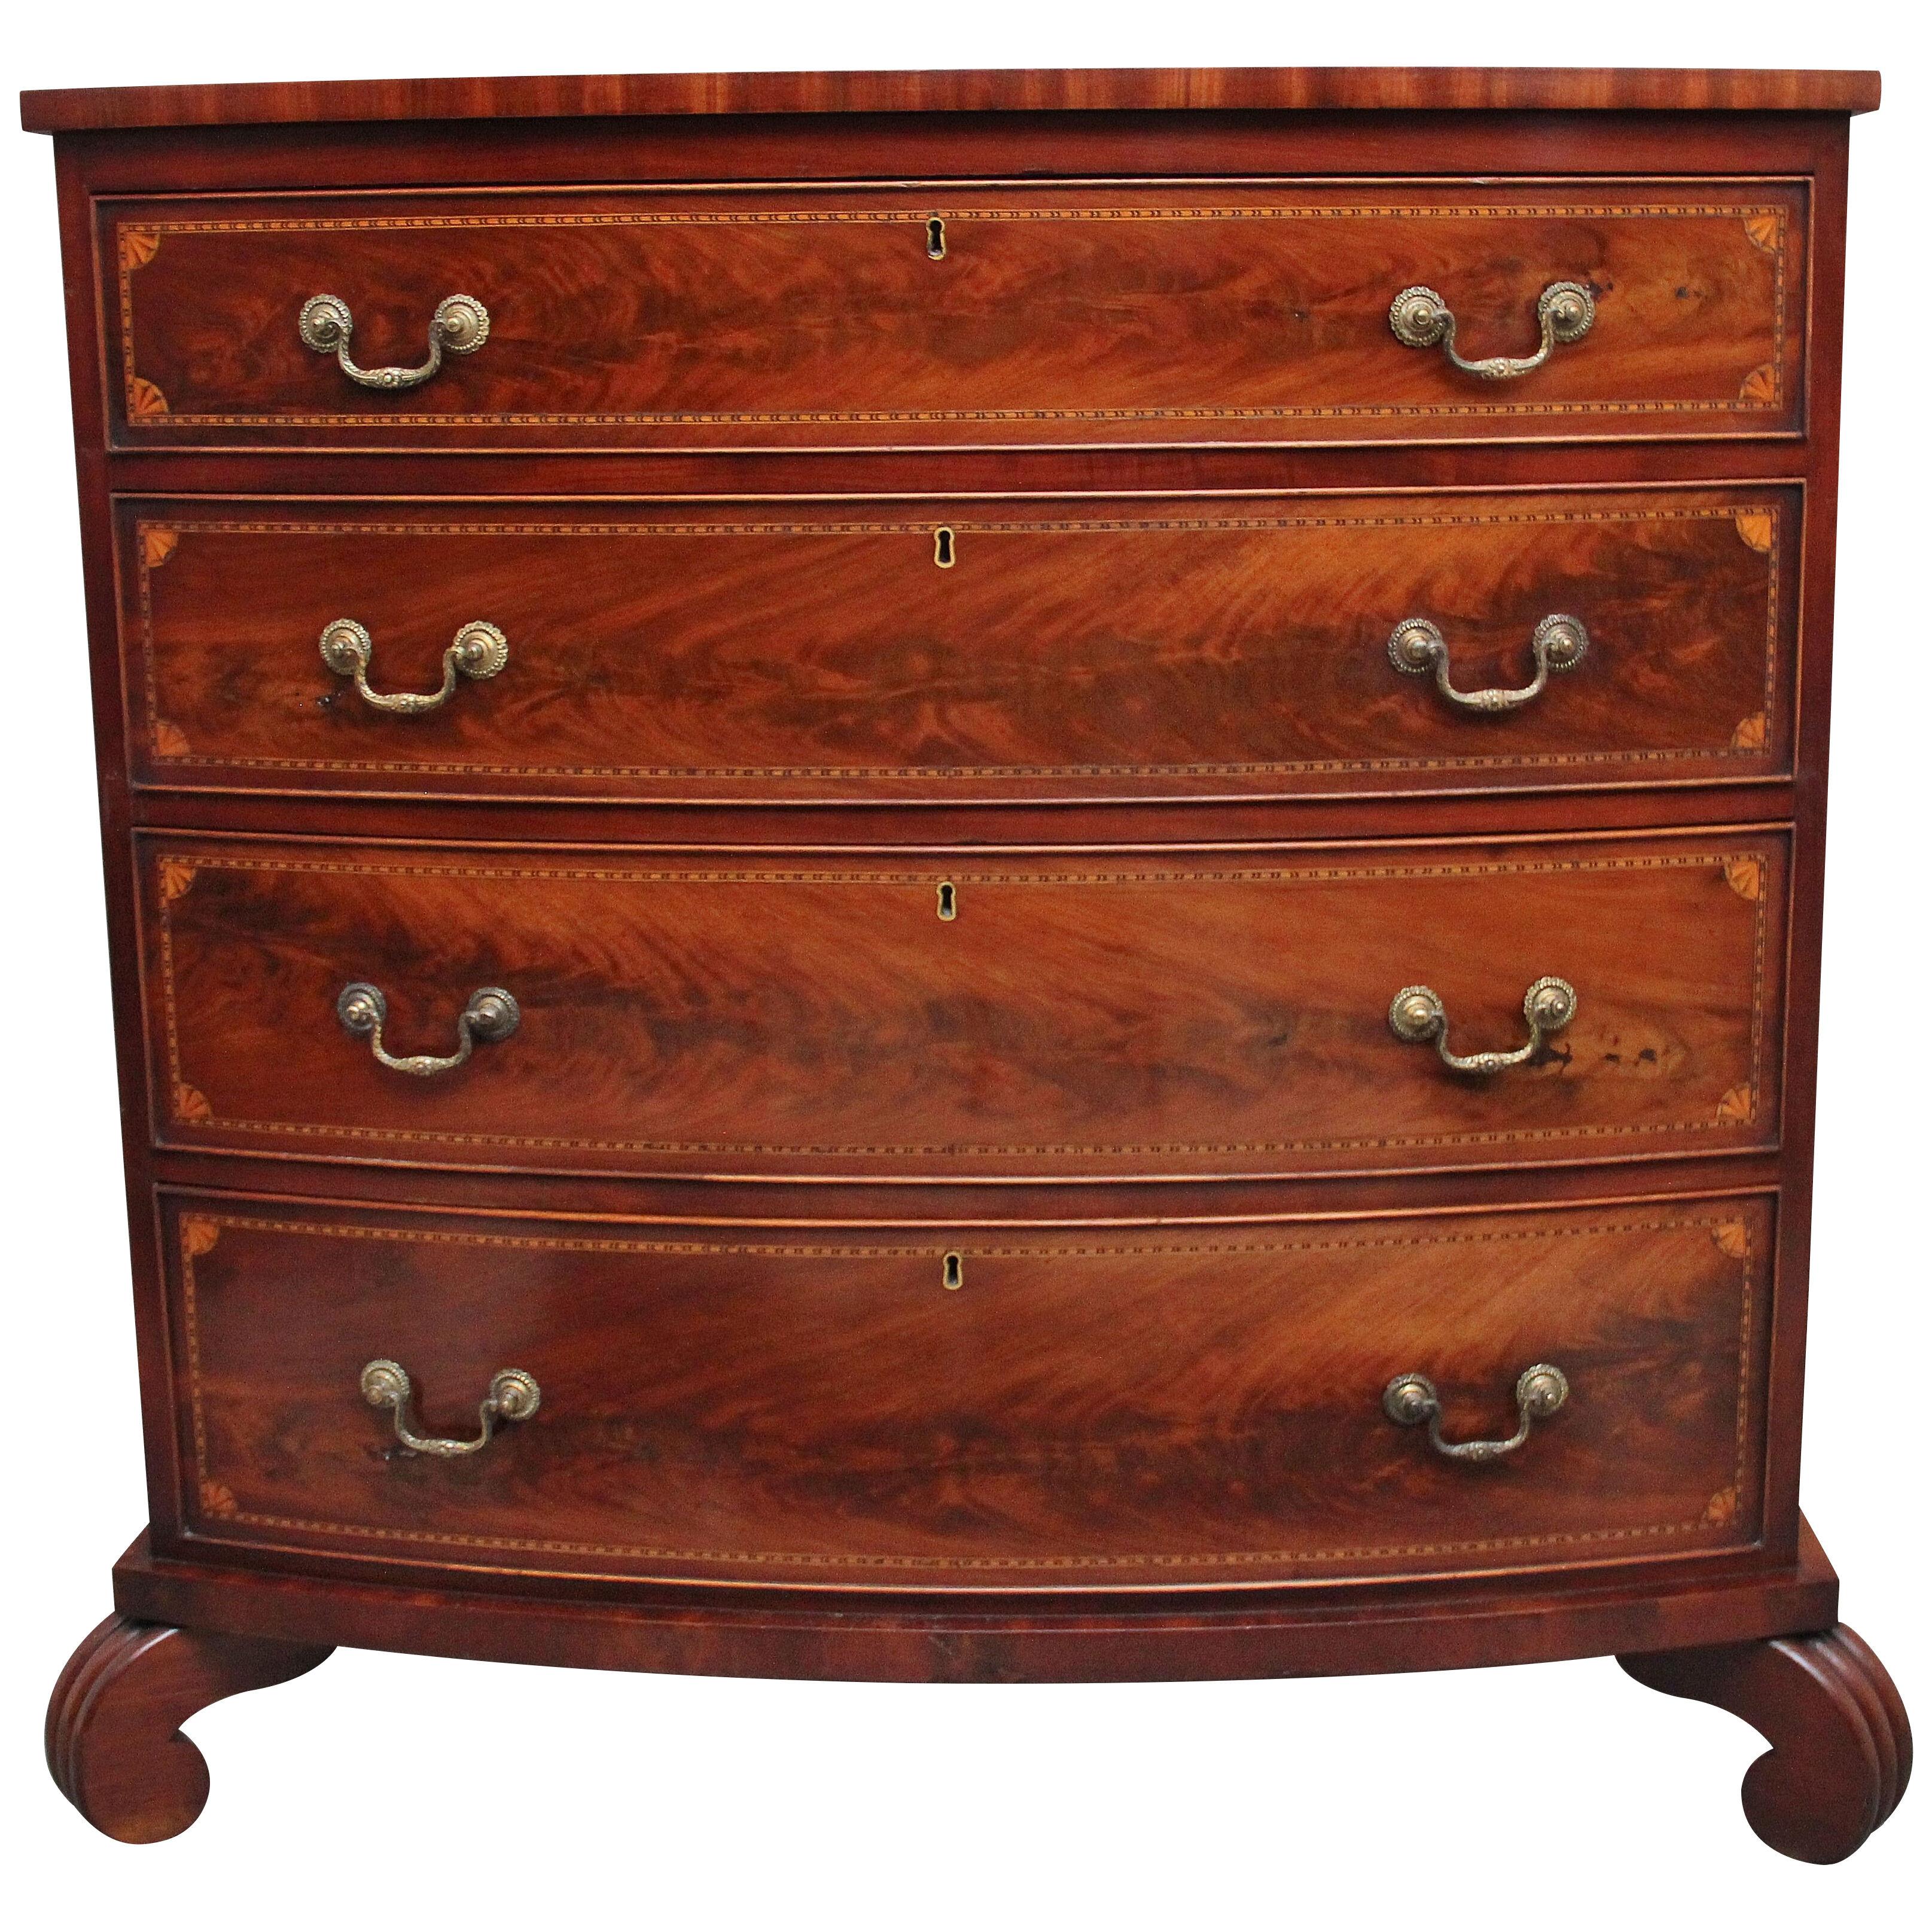 Early 19th Century flame mahogany and inlaid bowfront chest of drawers